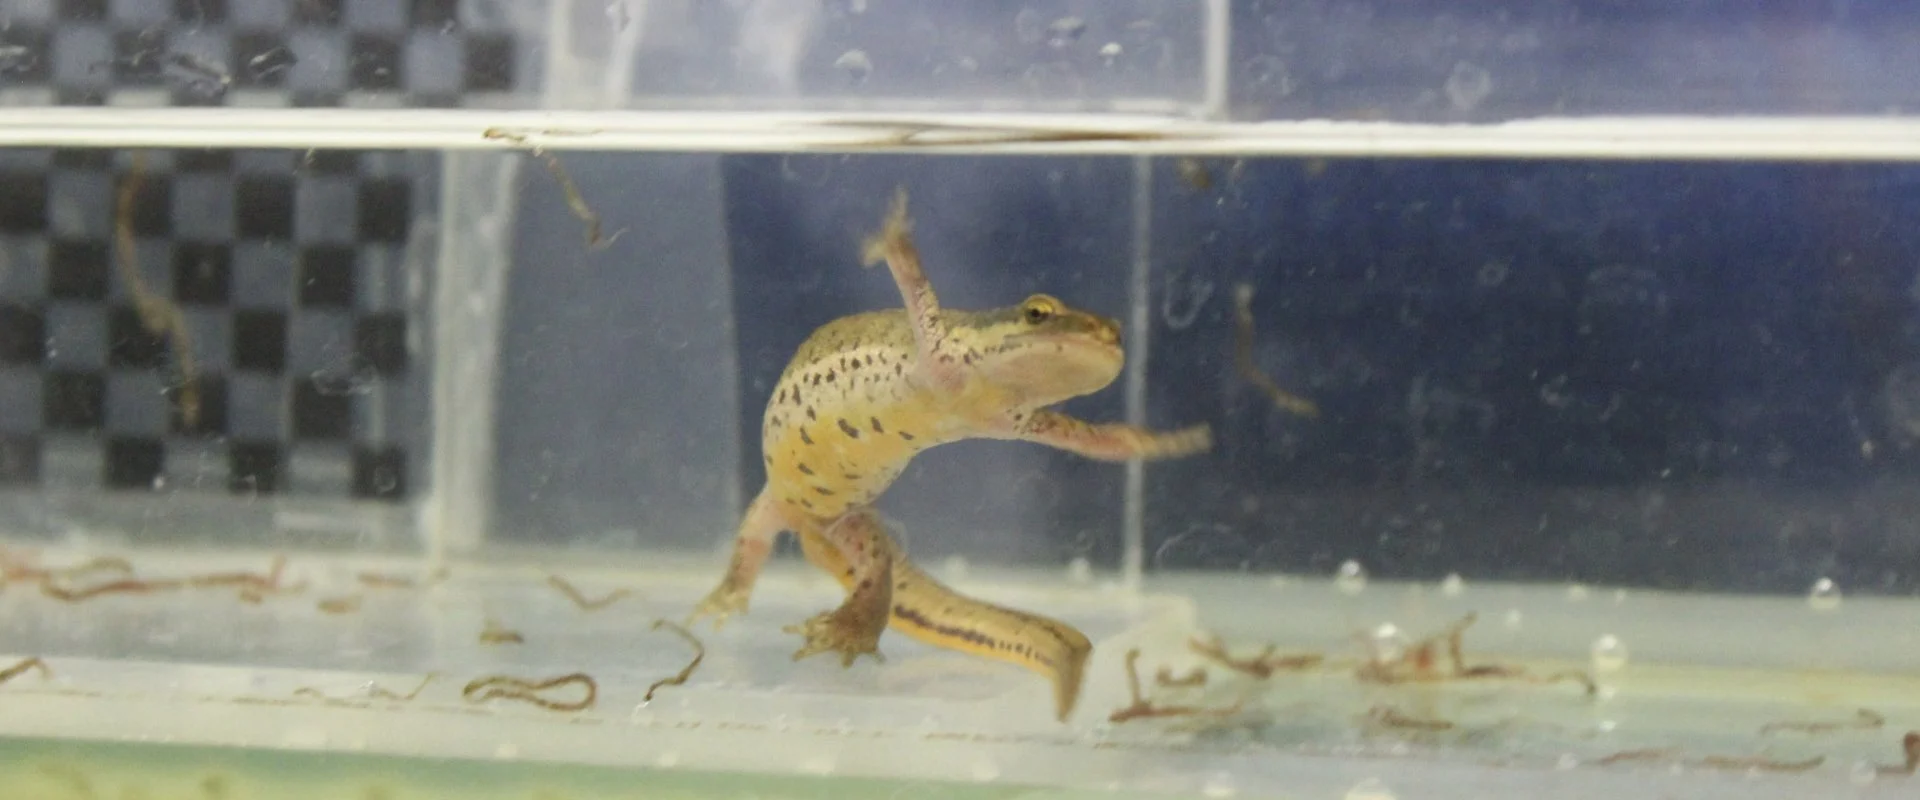 Salamander swimming in a tank of clear water with a partially obscured checkerboard pattern in the background